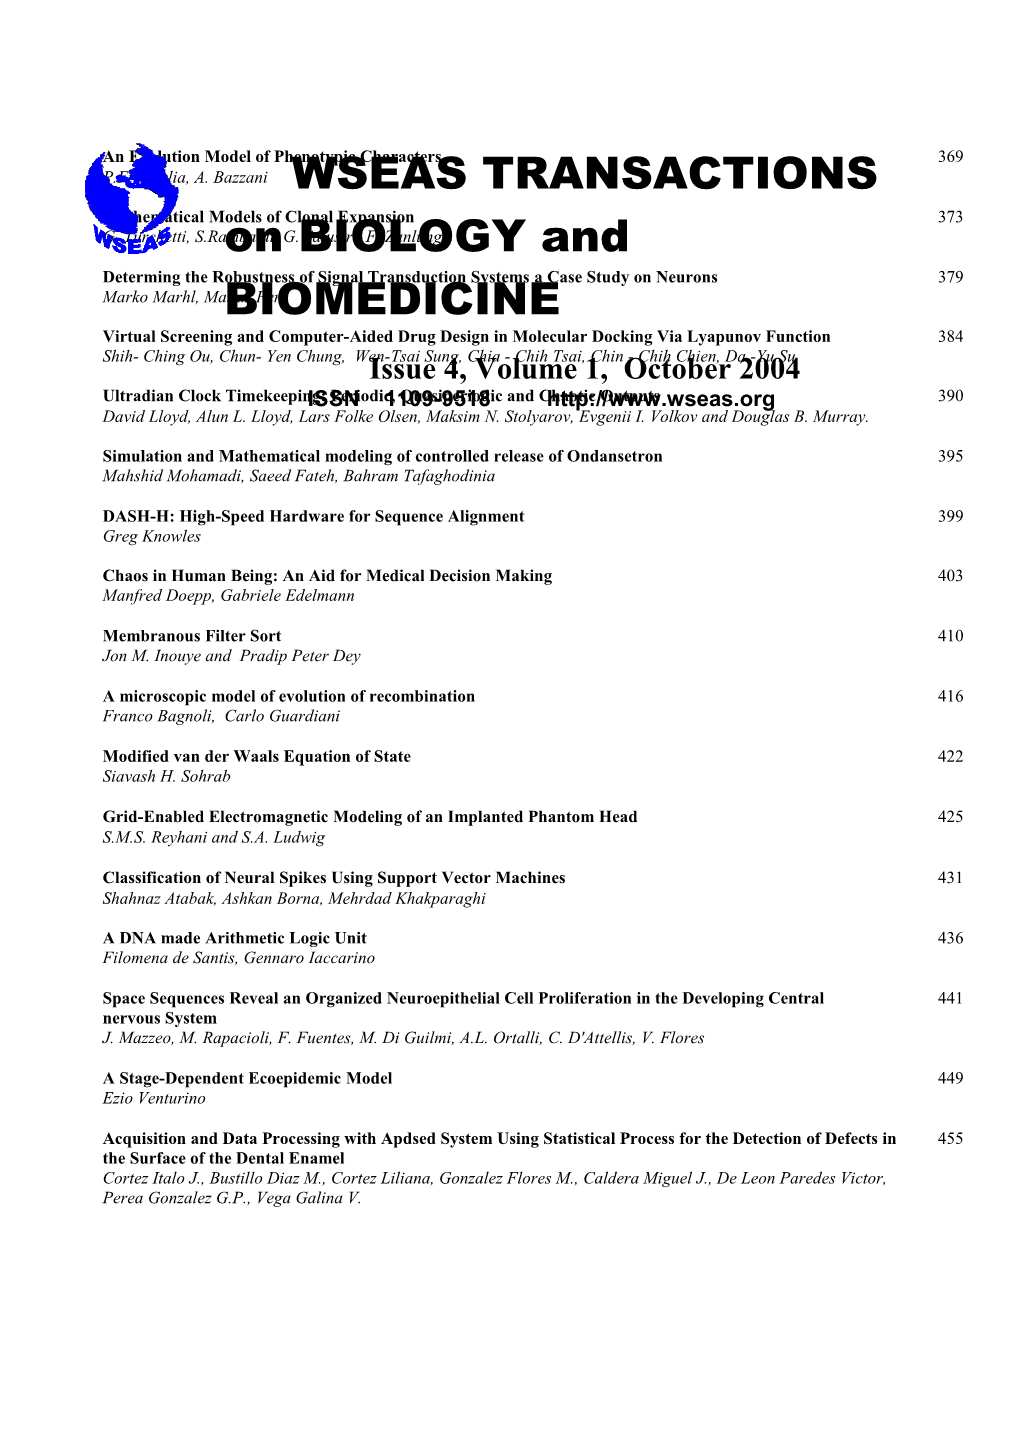 WSEAS Trans. on BIOLOGY and BIOMEDICINE, October 2004